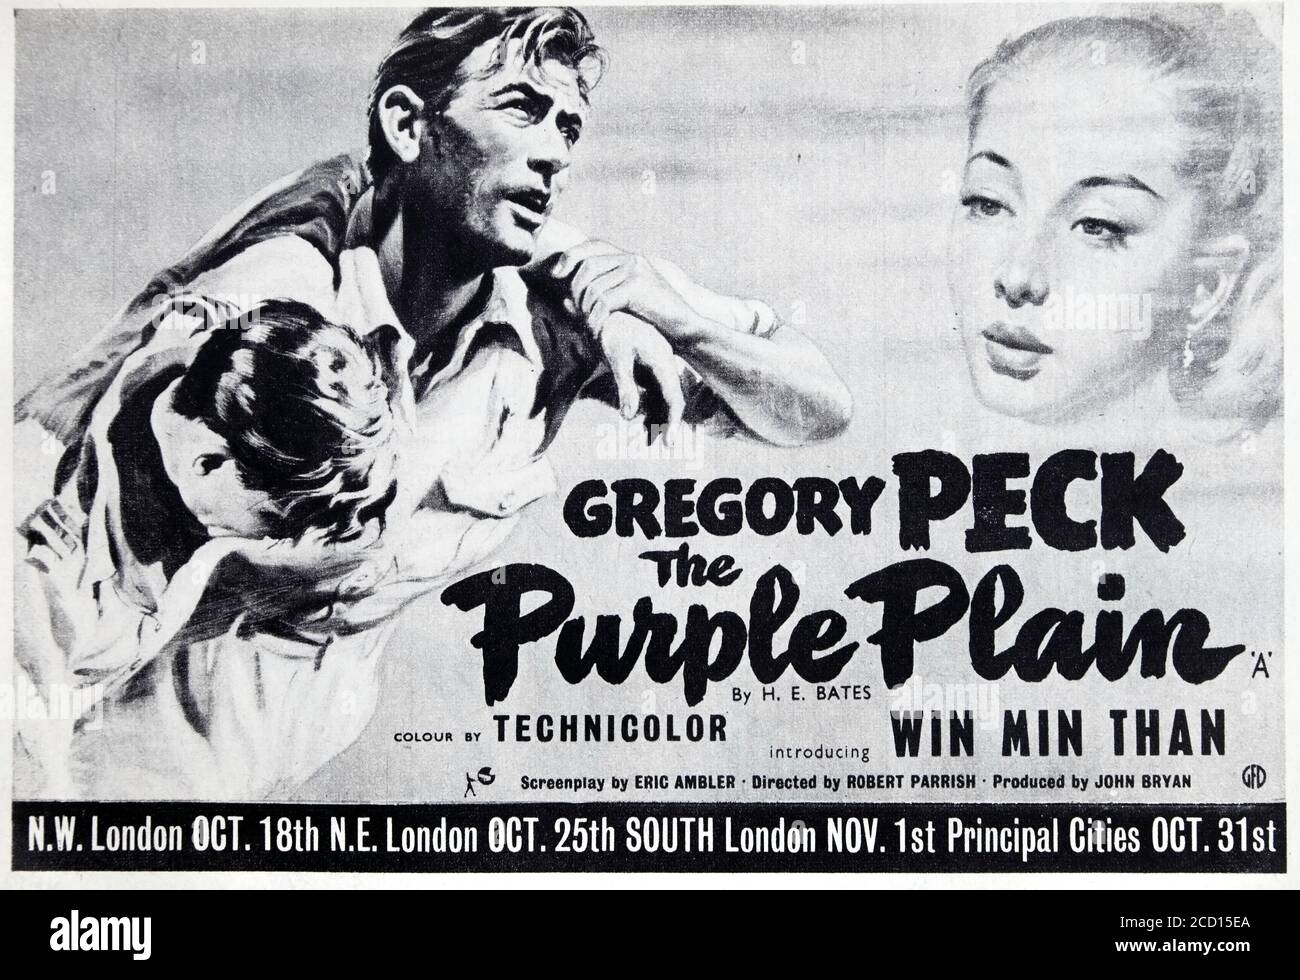 Vintage advertisement for the release of 'The Purple Plain' war / adventure film in 1954, starring Gregory Peck. Stock Photo